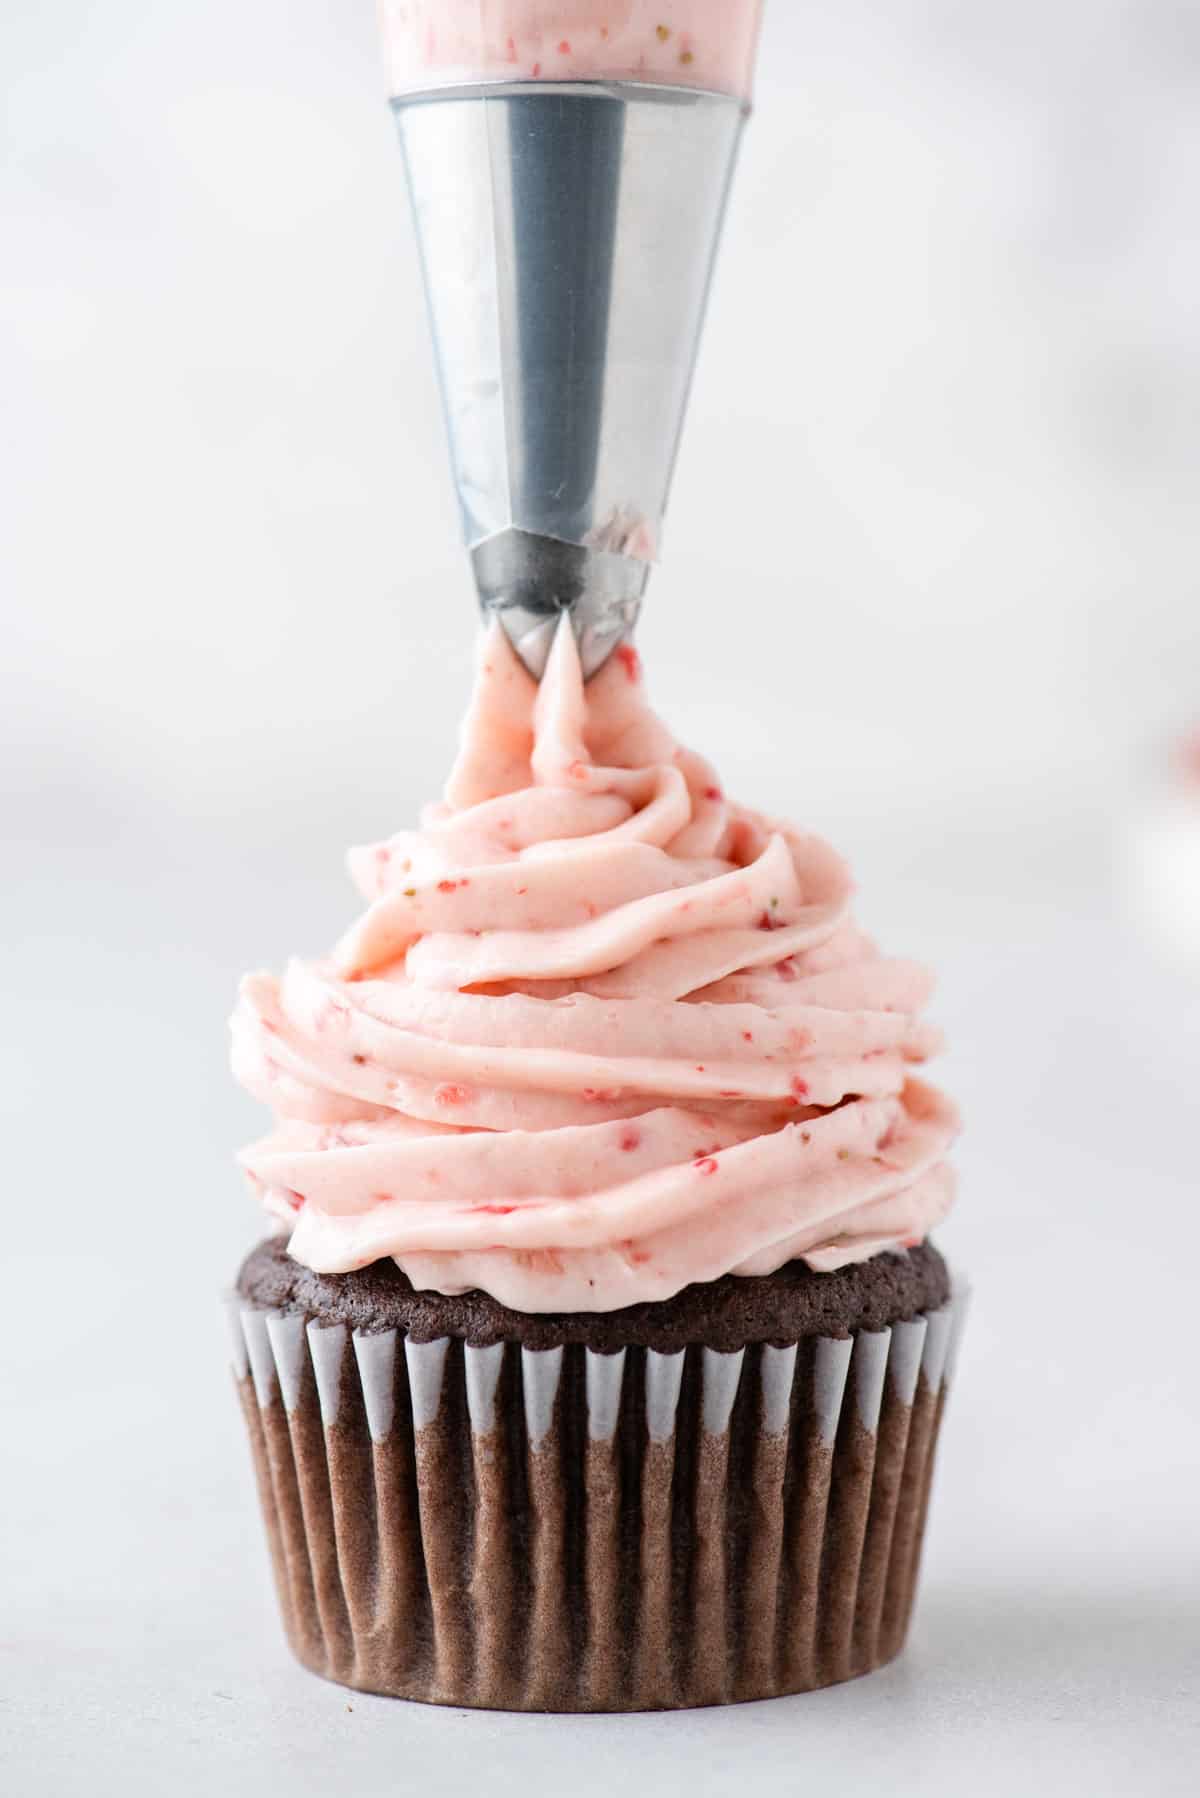 chocolate cupcake sitting on a white surface with strawberry frosting being piped on top